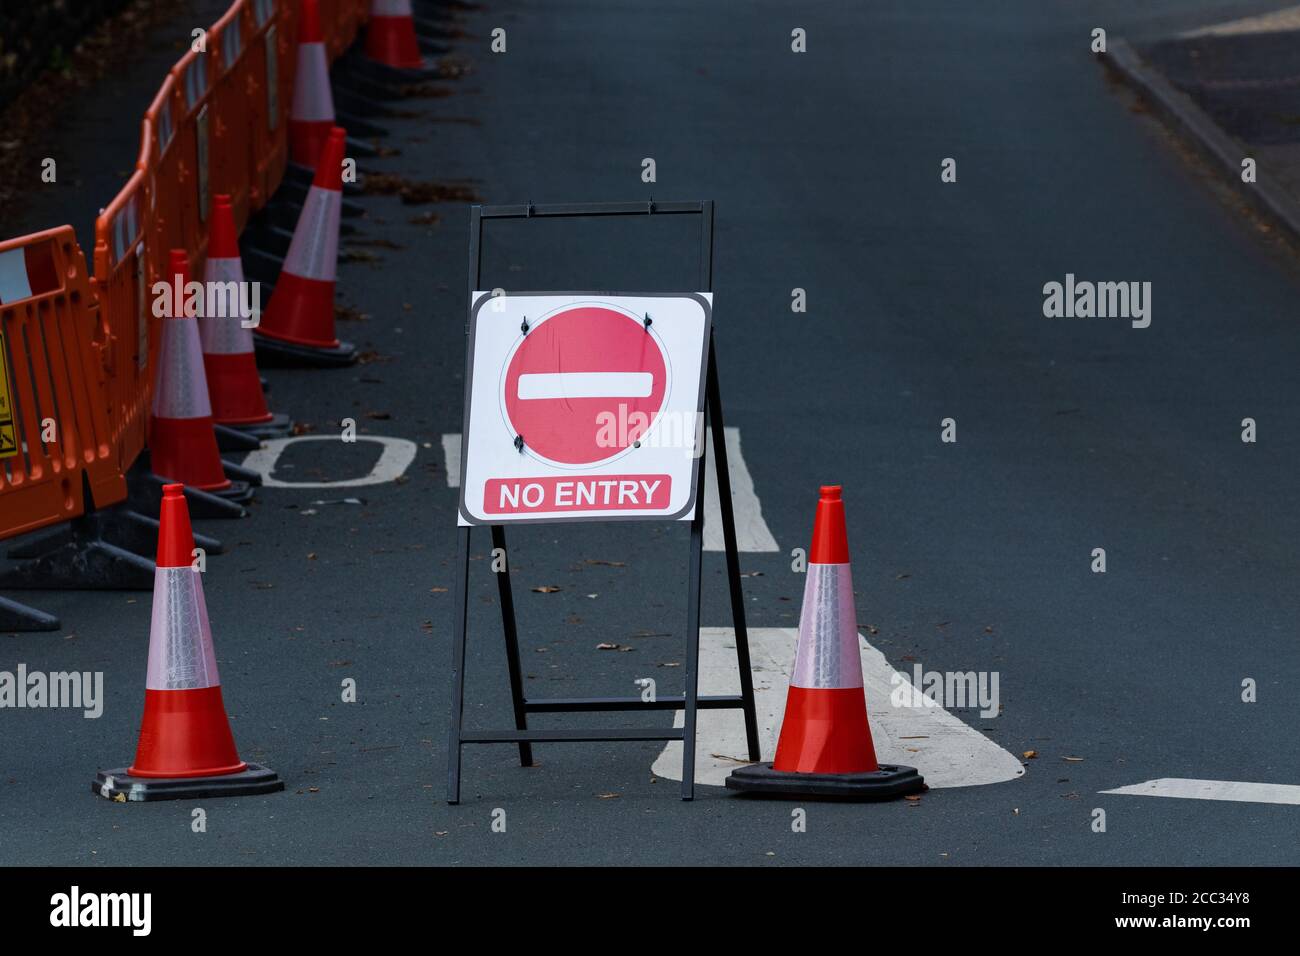 A road block in Baildon, Yorkshire. No Entry Signs, cones and barriers have been erected to stop traffic entering. Stock Photo